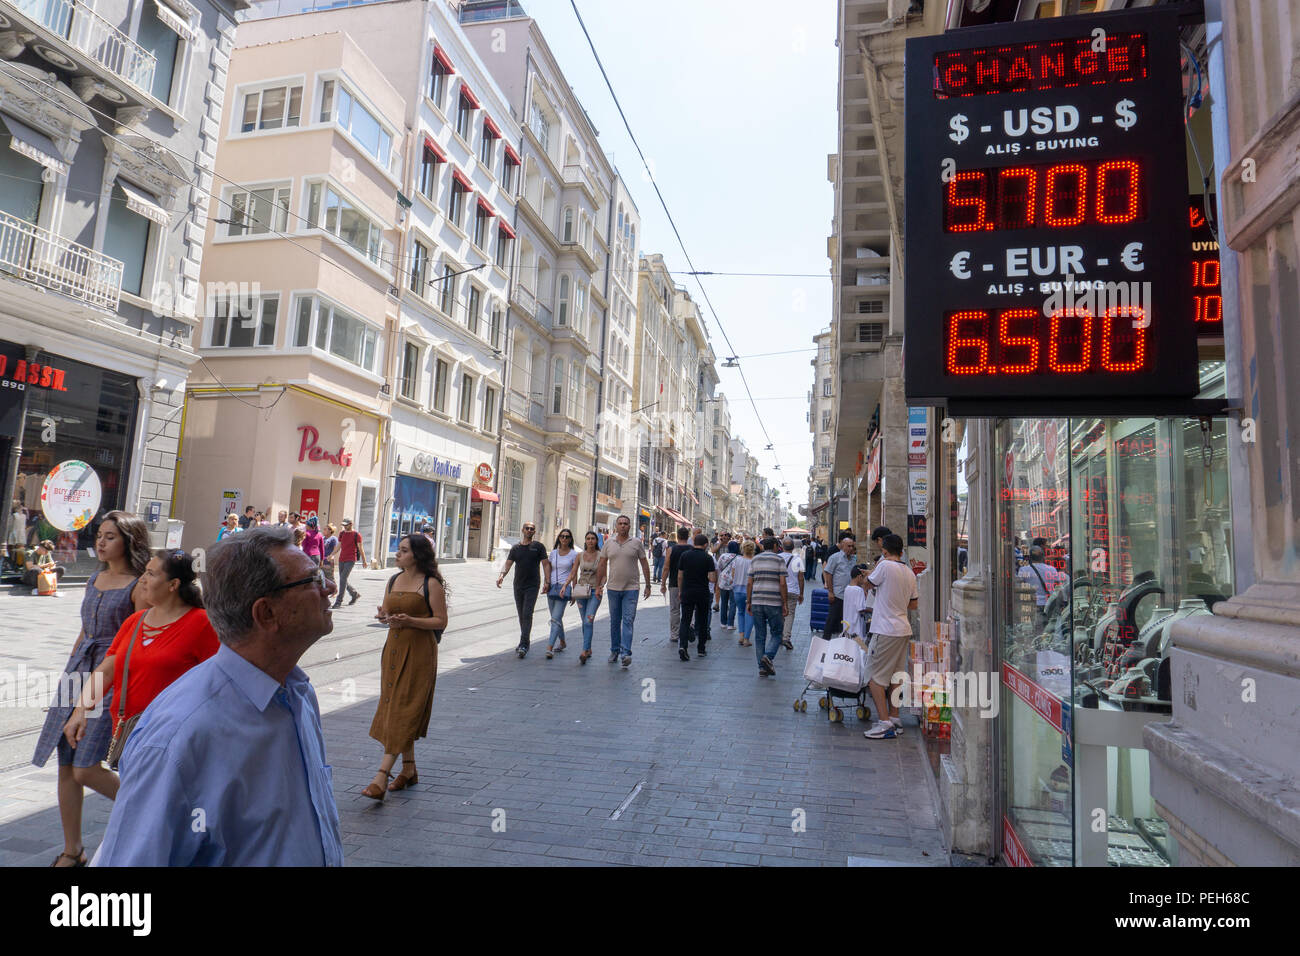 Istanbul Turkey 15th August 2018 Many Turks And Tourists Went To Change Office Today Amid The Rapid Changes In Turkish Currency Credit Engin Karaman Alamy Live News Stock Photo Alamy